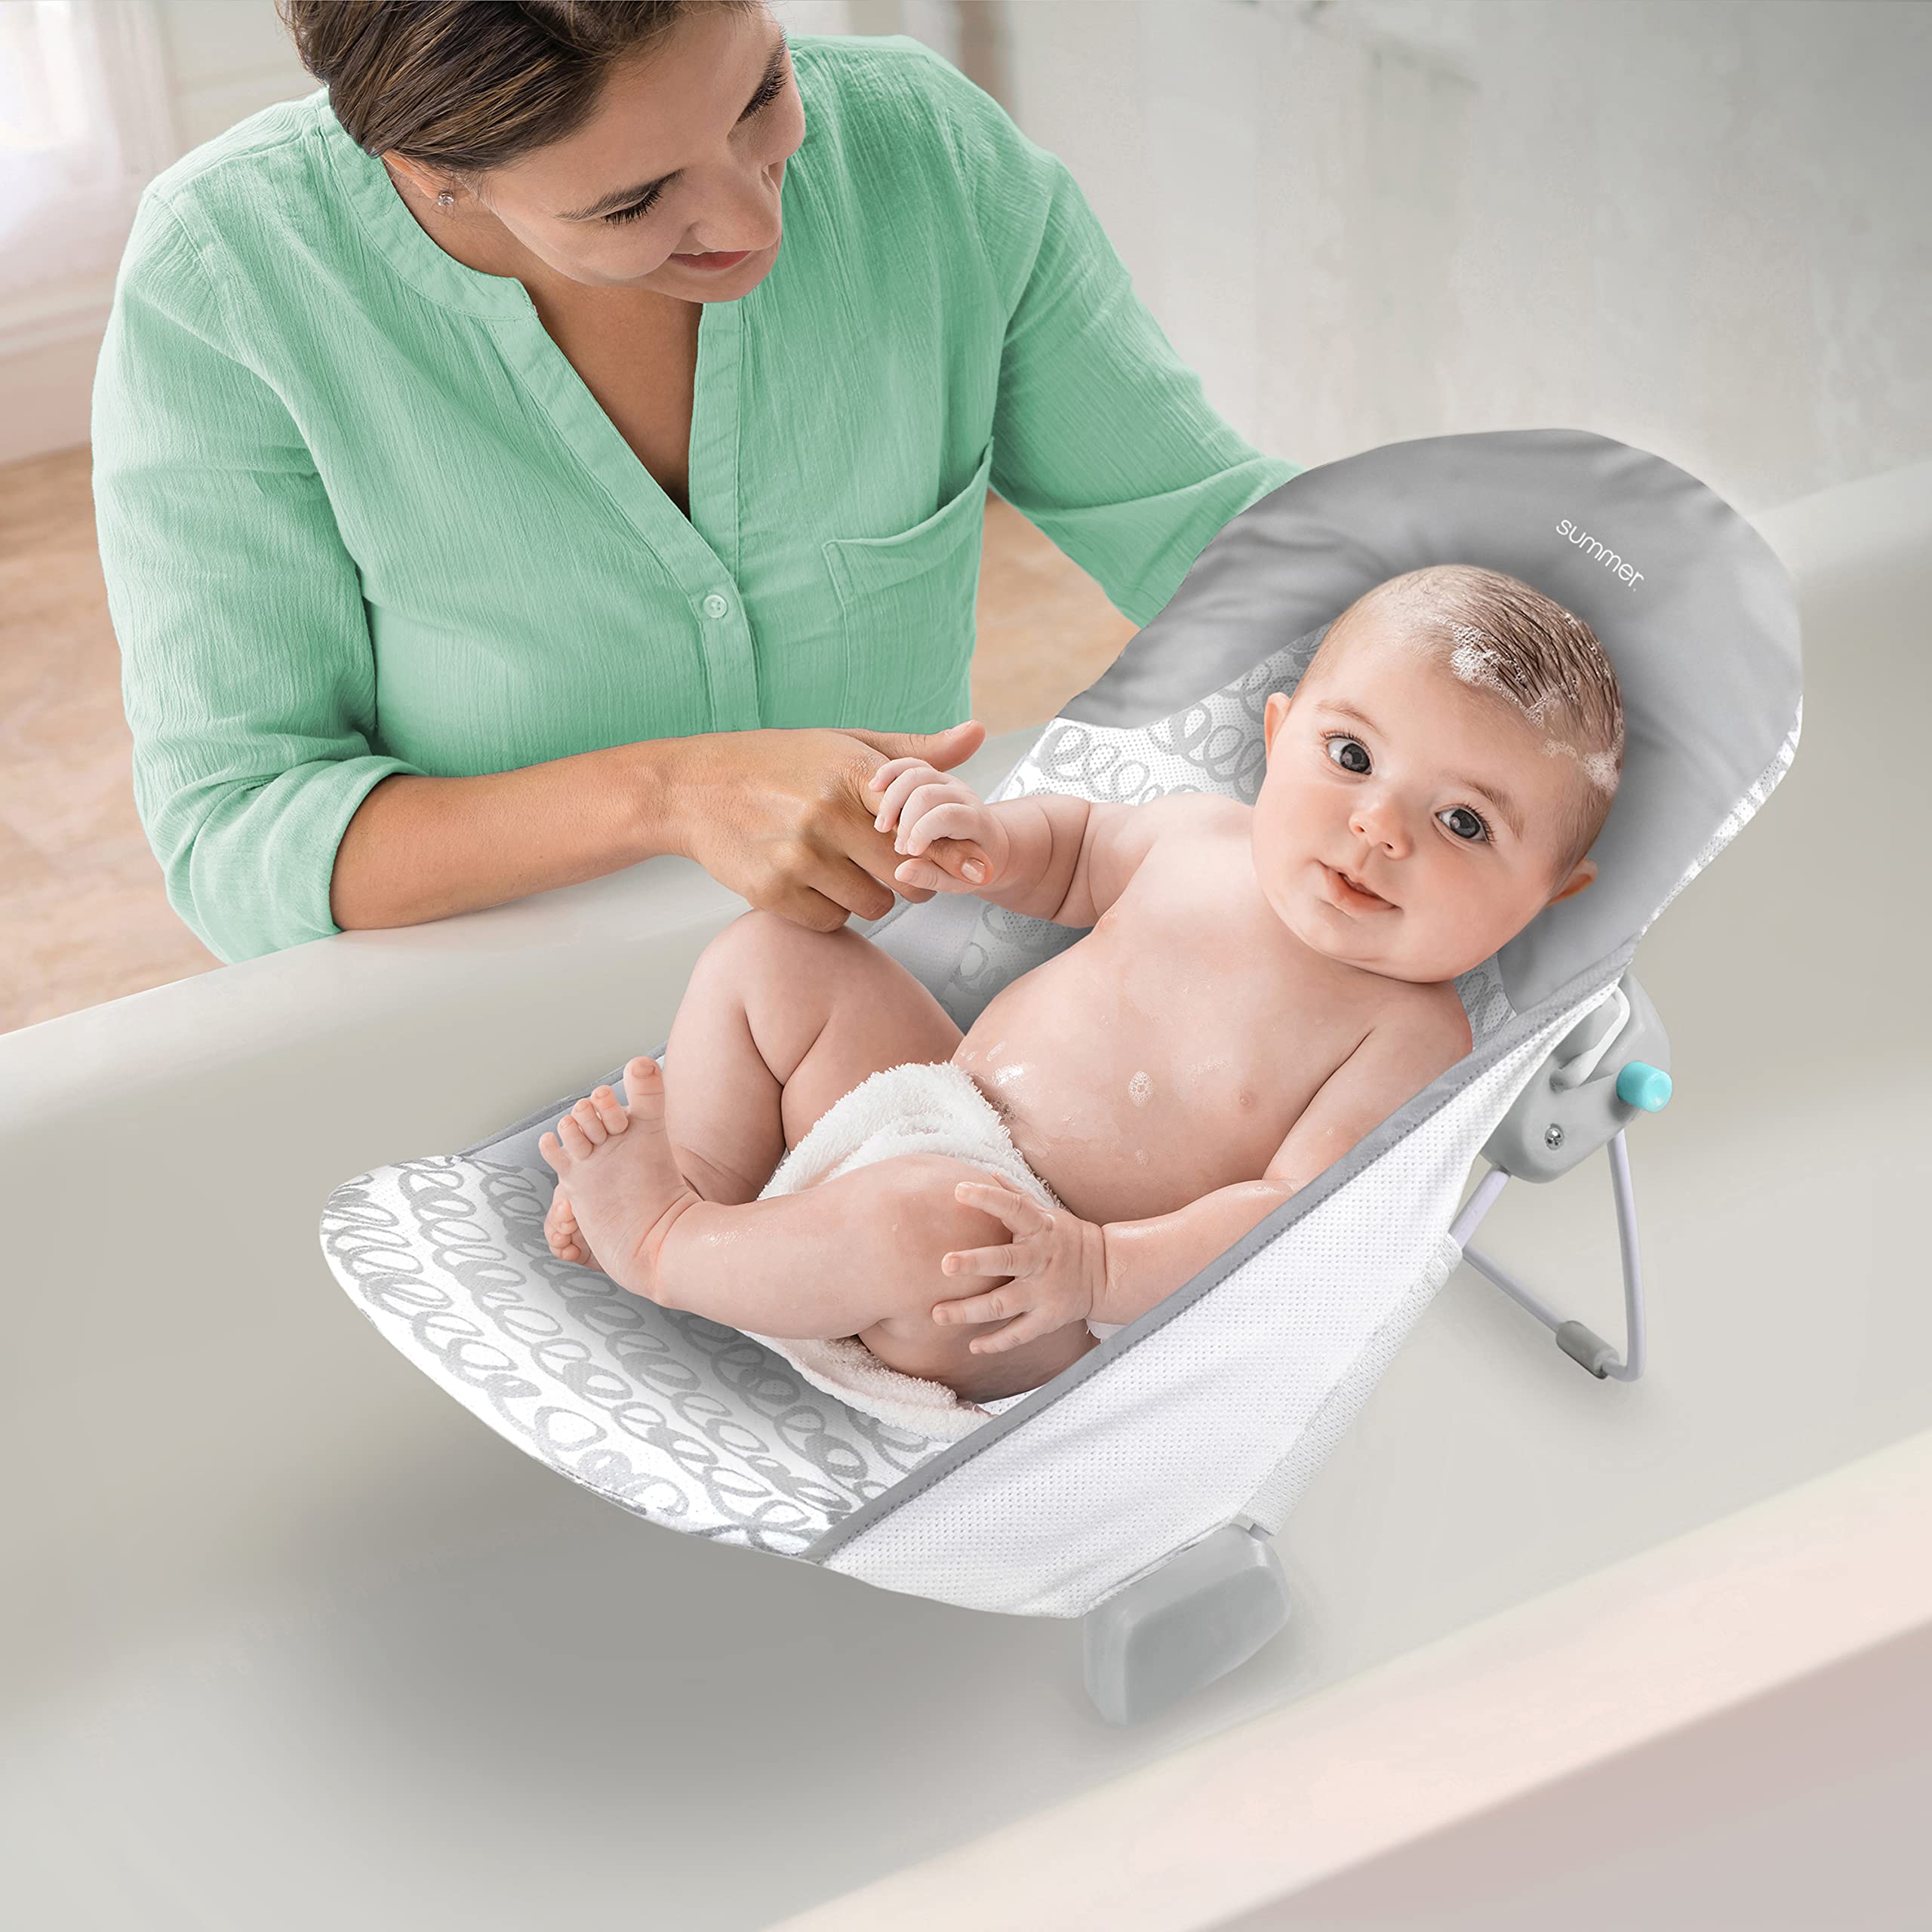 Summer Infant by Ingenuity Foldaway 2-Position Bather - 2-Position Bath Support for Sink Or Bathtub, for Ages 0-6 Months, Up to 20 Pounds